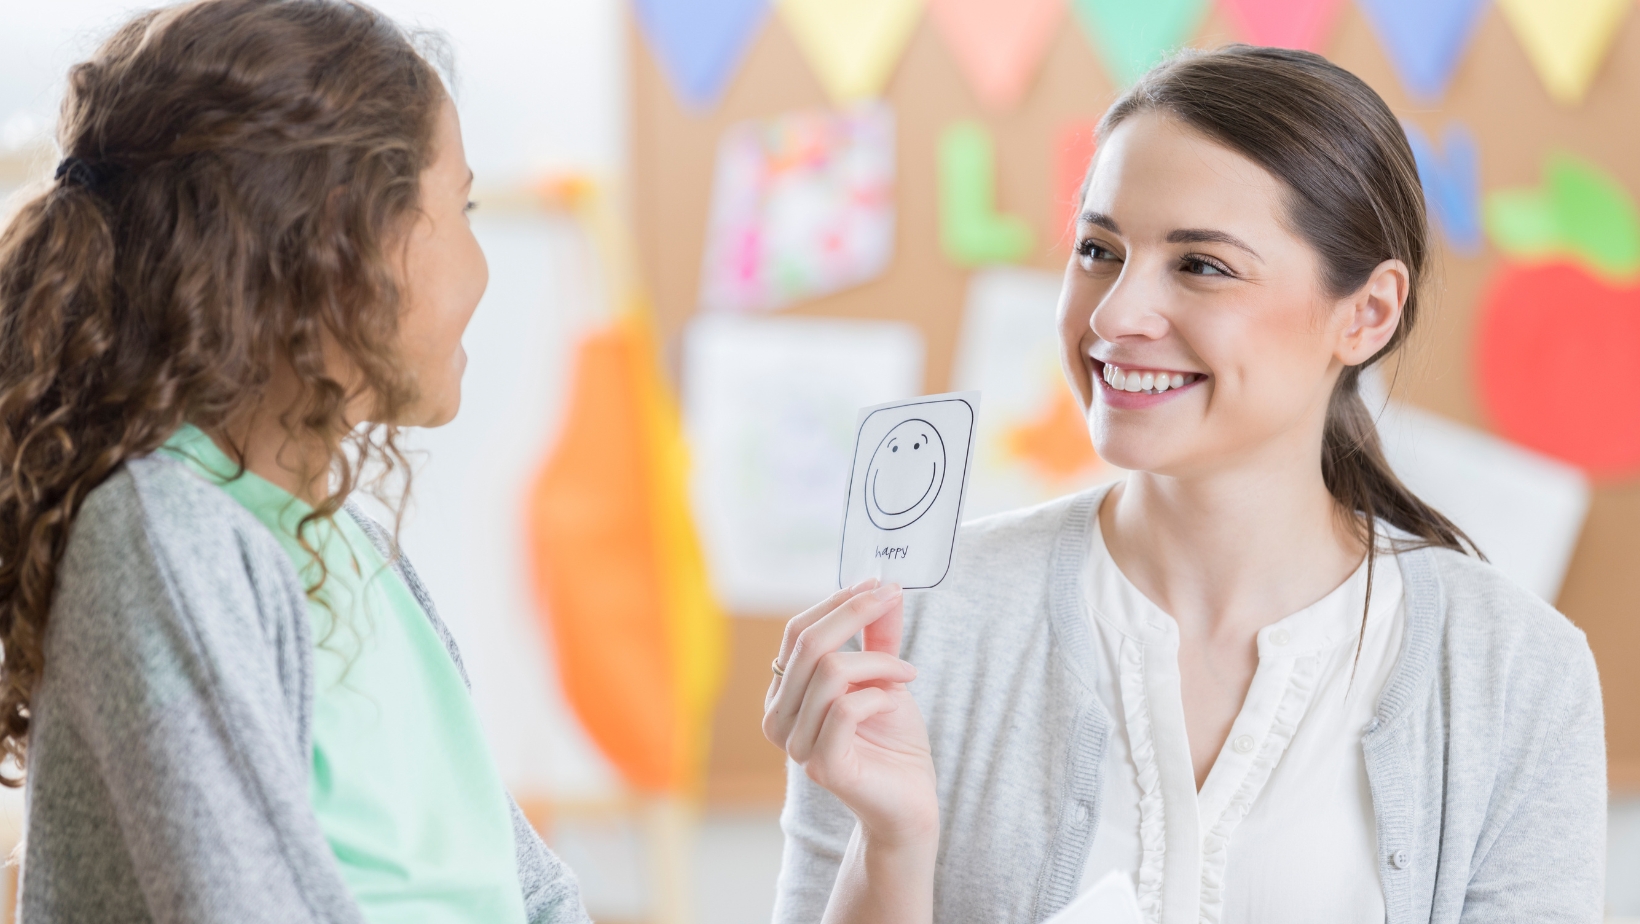 flashcards can benefit auditory and visual, but not kinesthetic learners.